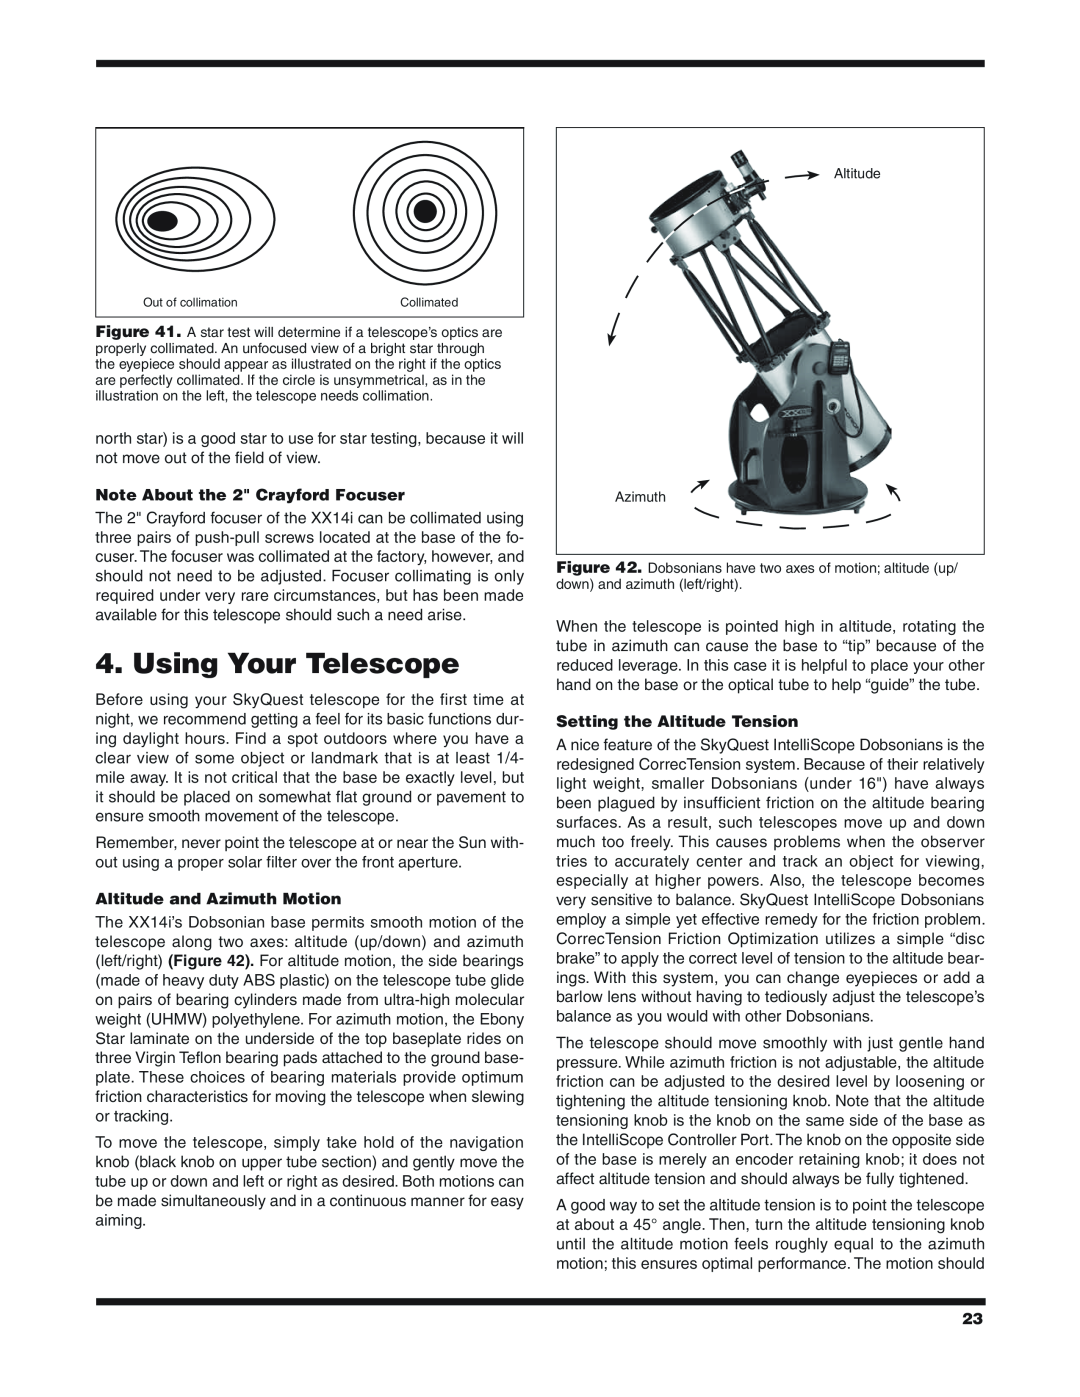 Orion XX14I instruction manual Using Your Telescope, Note About the 2 Crayford Focuser, Altitude and Azimuth Motion 